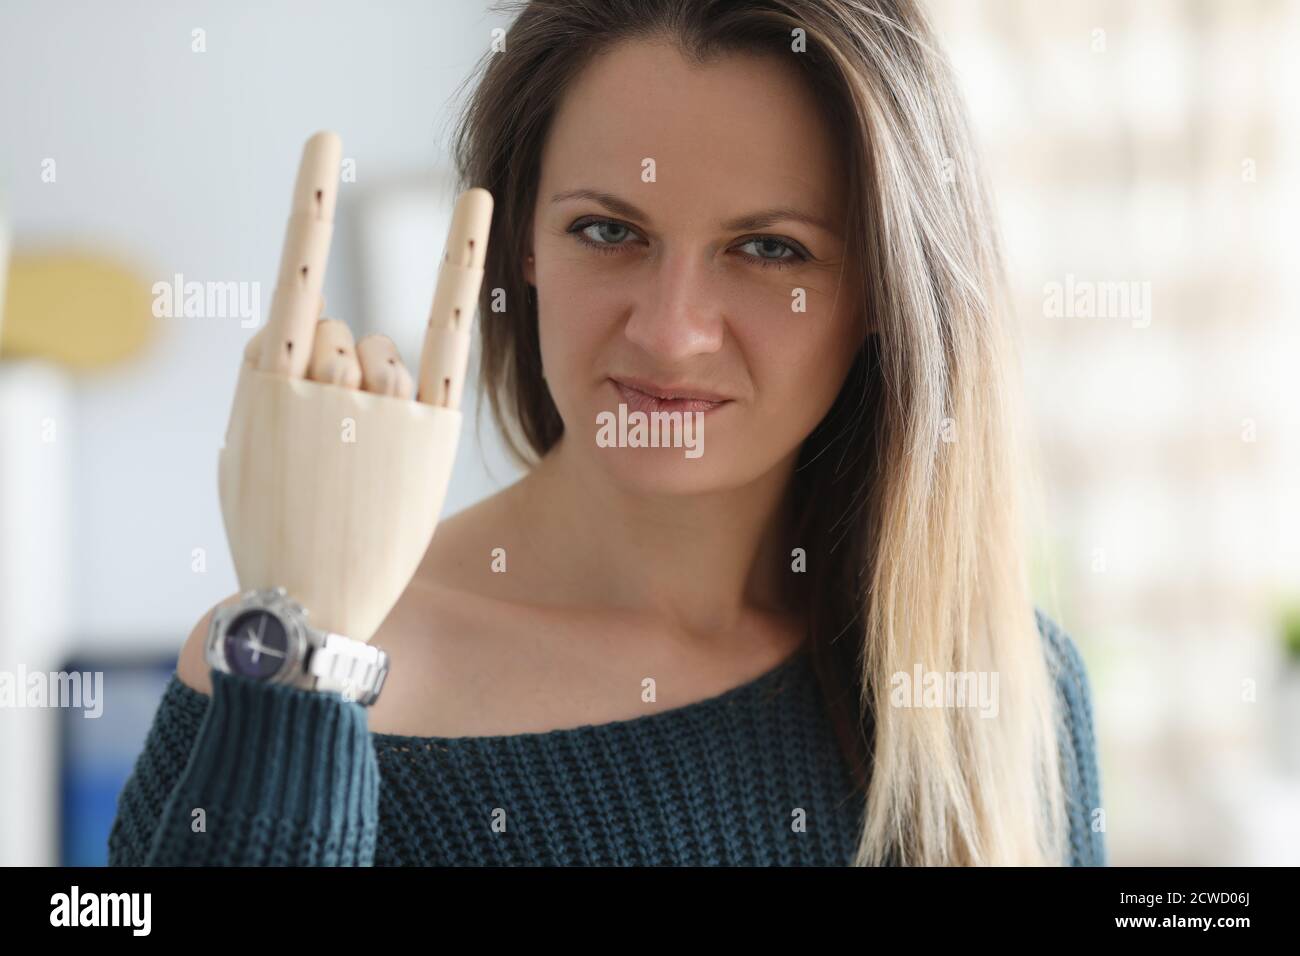 Disabled young woman shows wooden denture gesture portrait Stock Photo